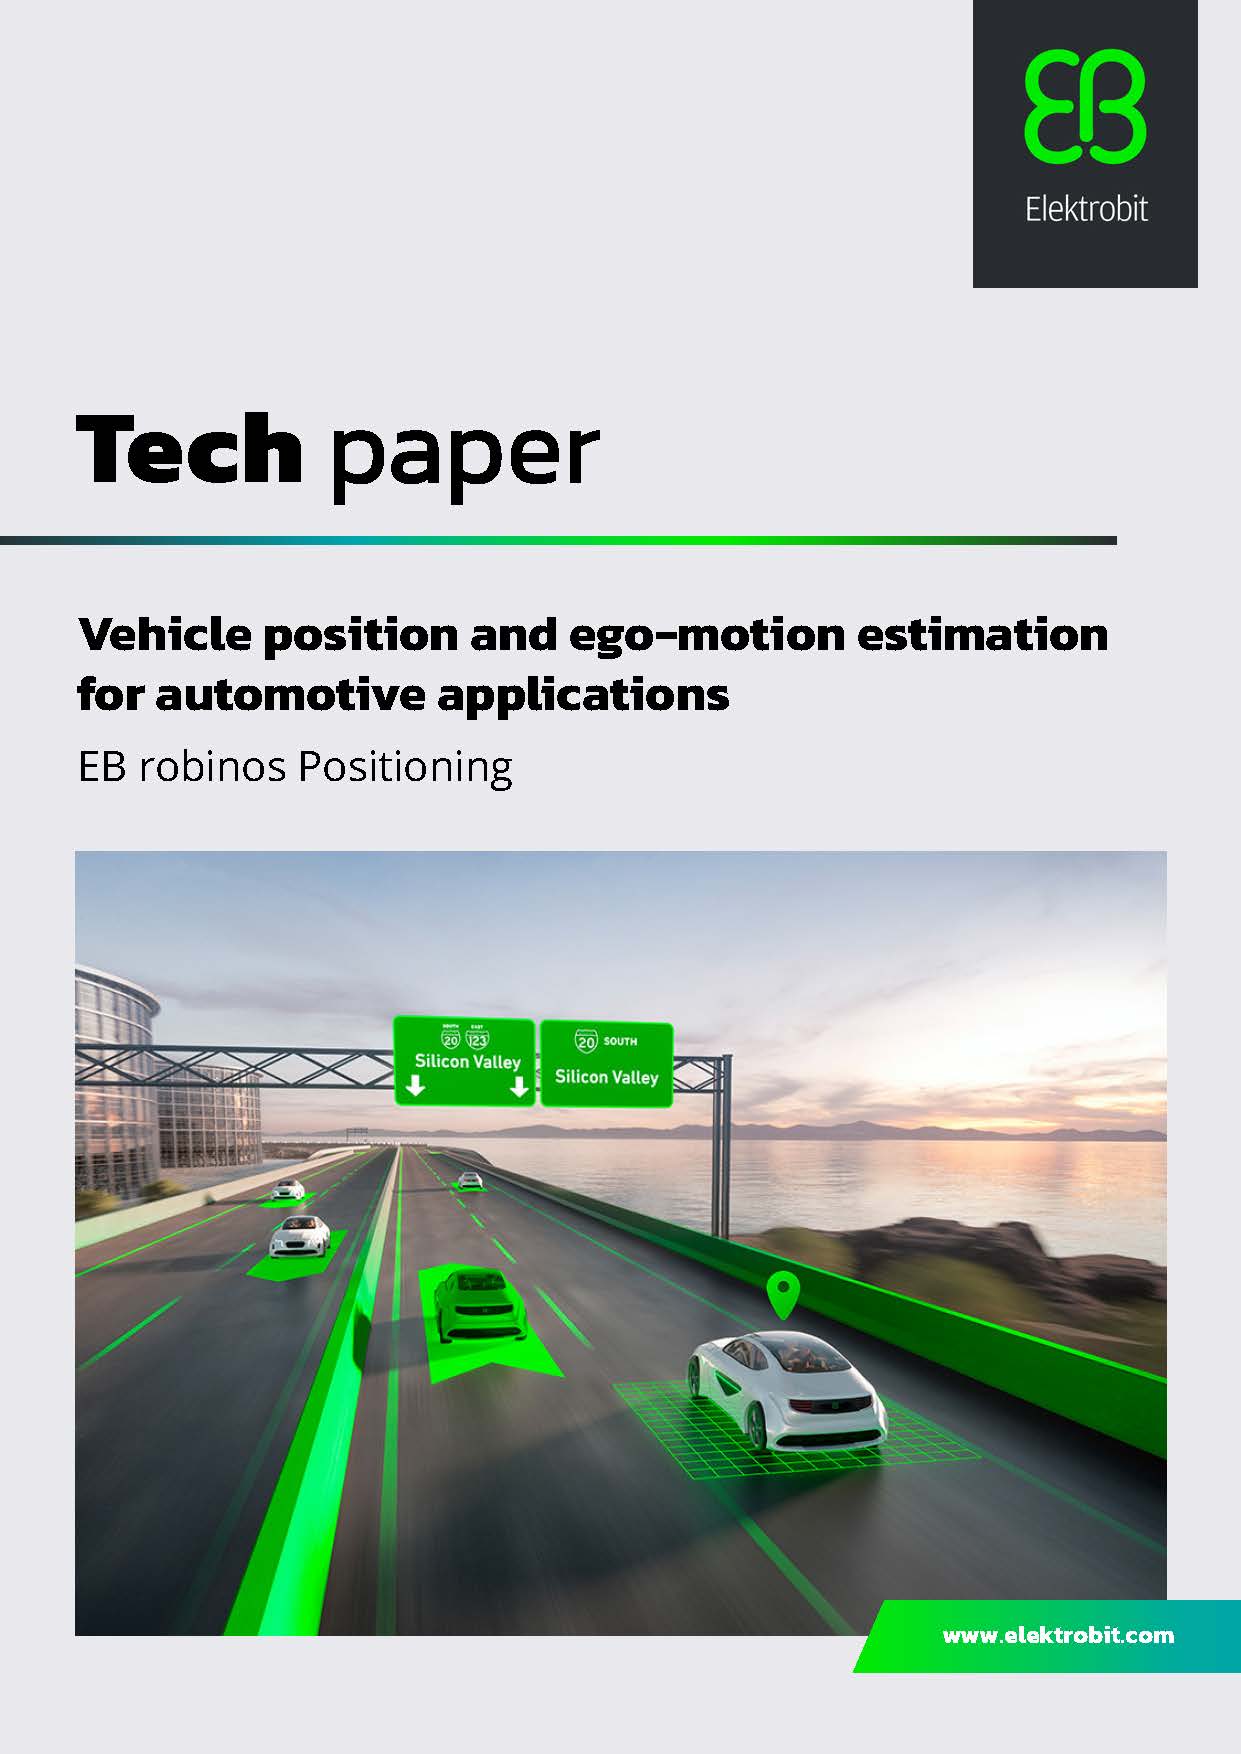 Vehicle position and ego-motion estimation for automotive applications